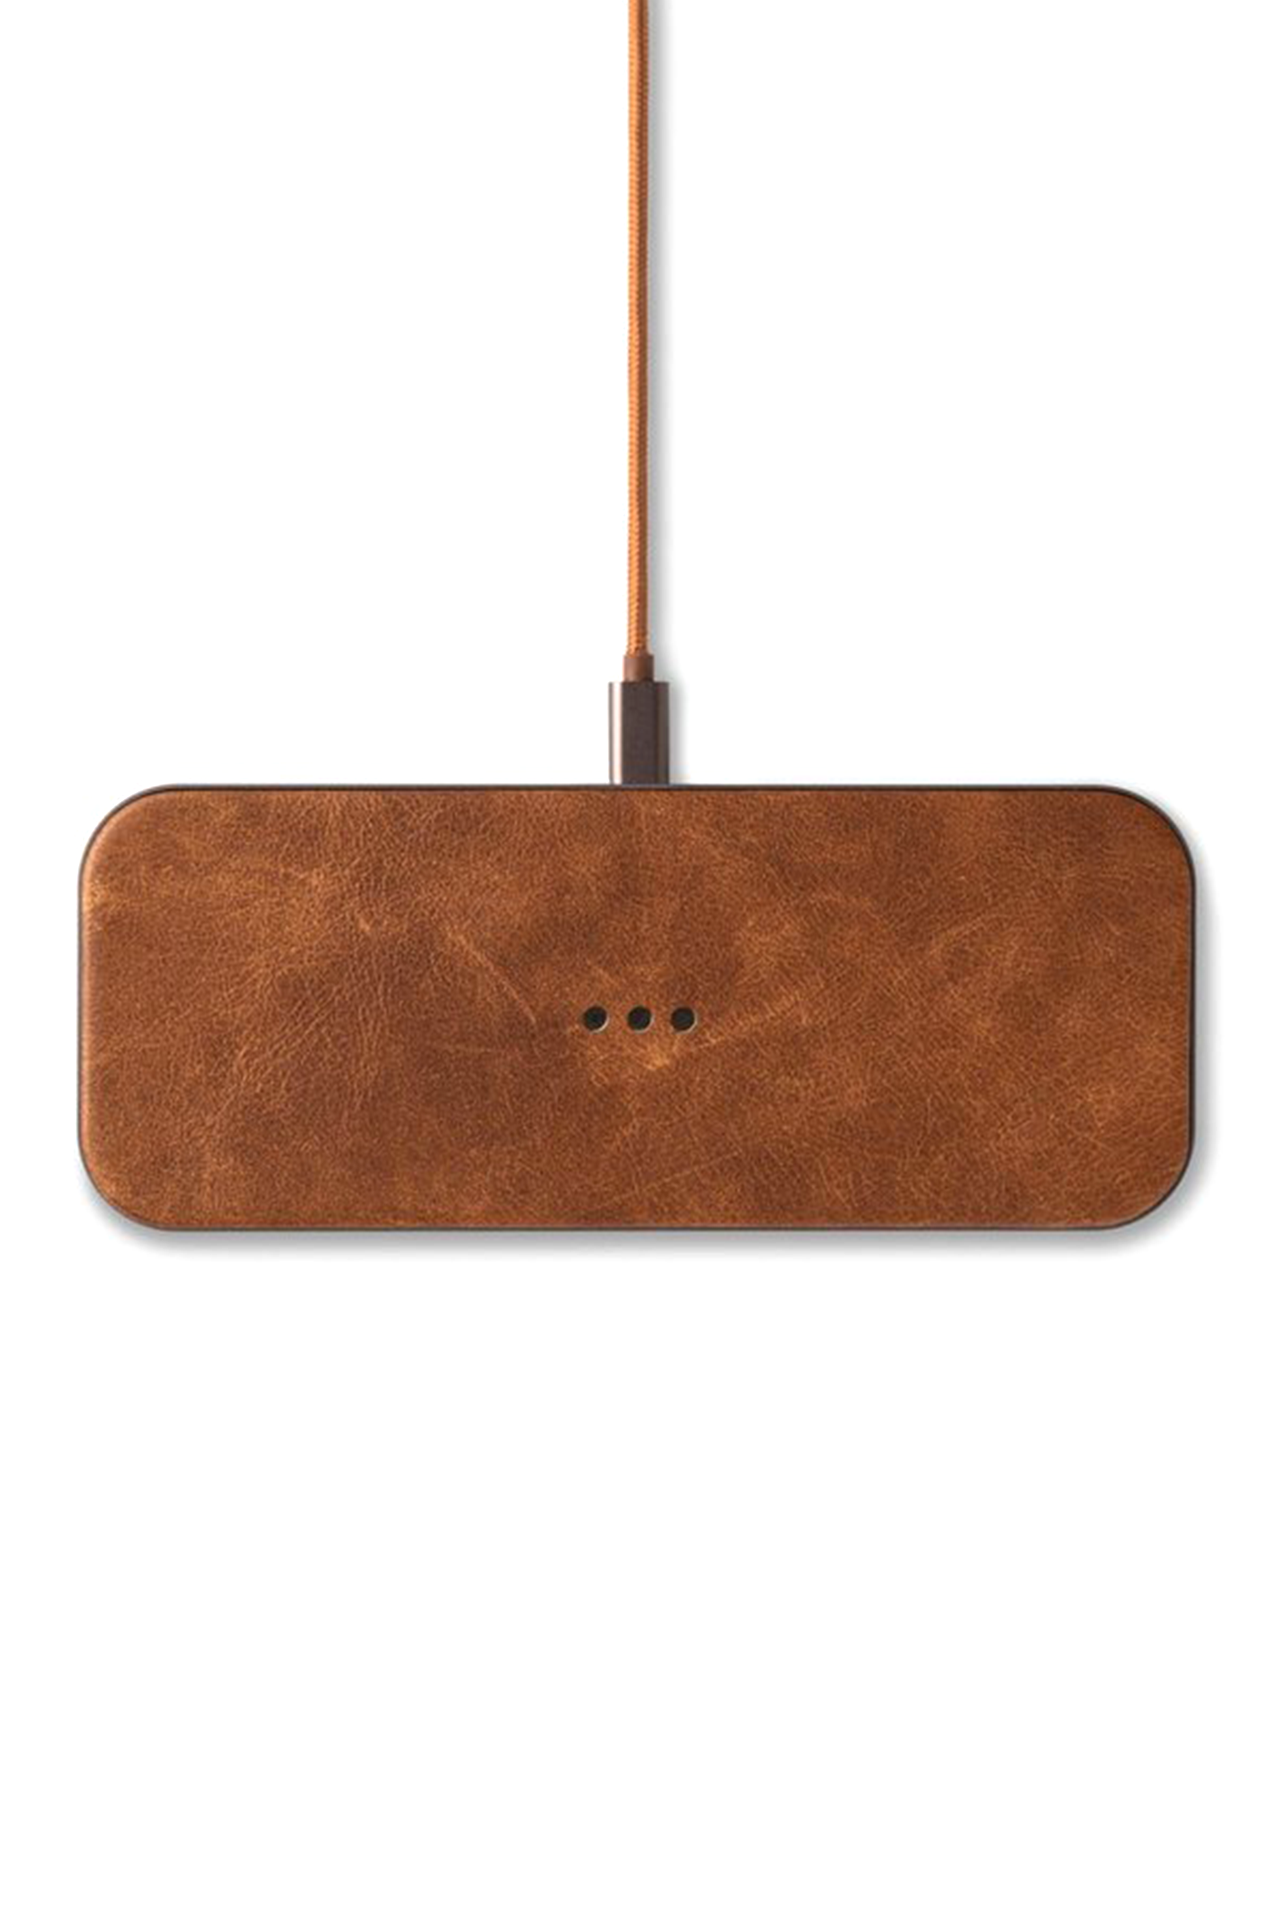 CATCH:2 Multi-Device Wireless Charging Brown Top Down Image (6604412846195)